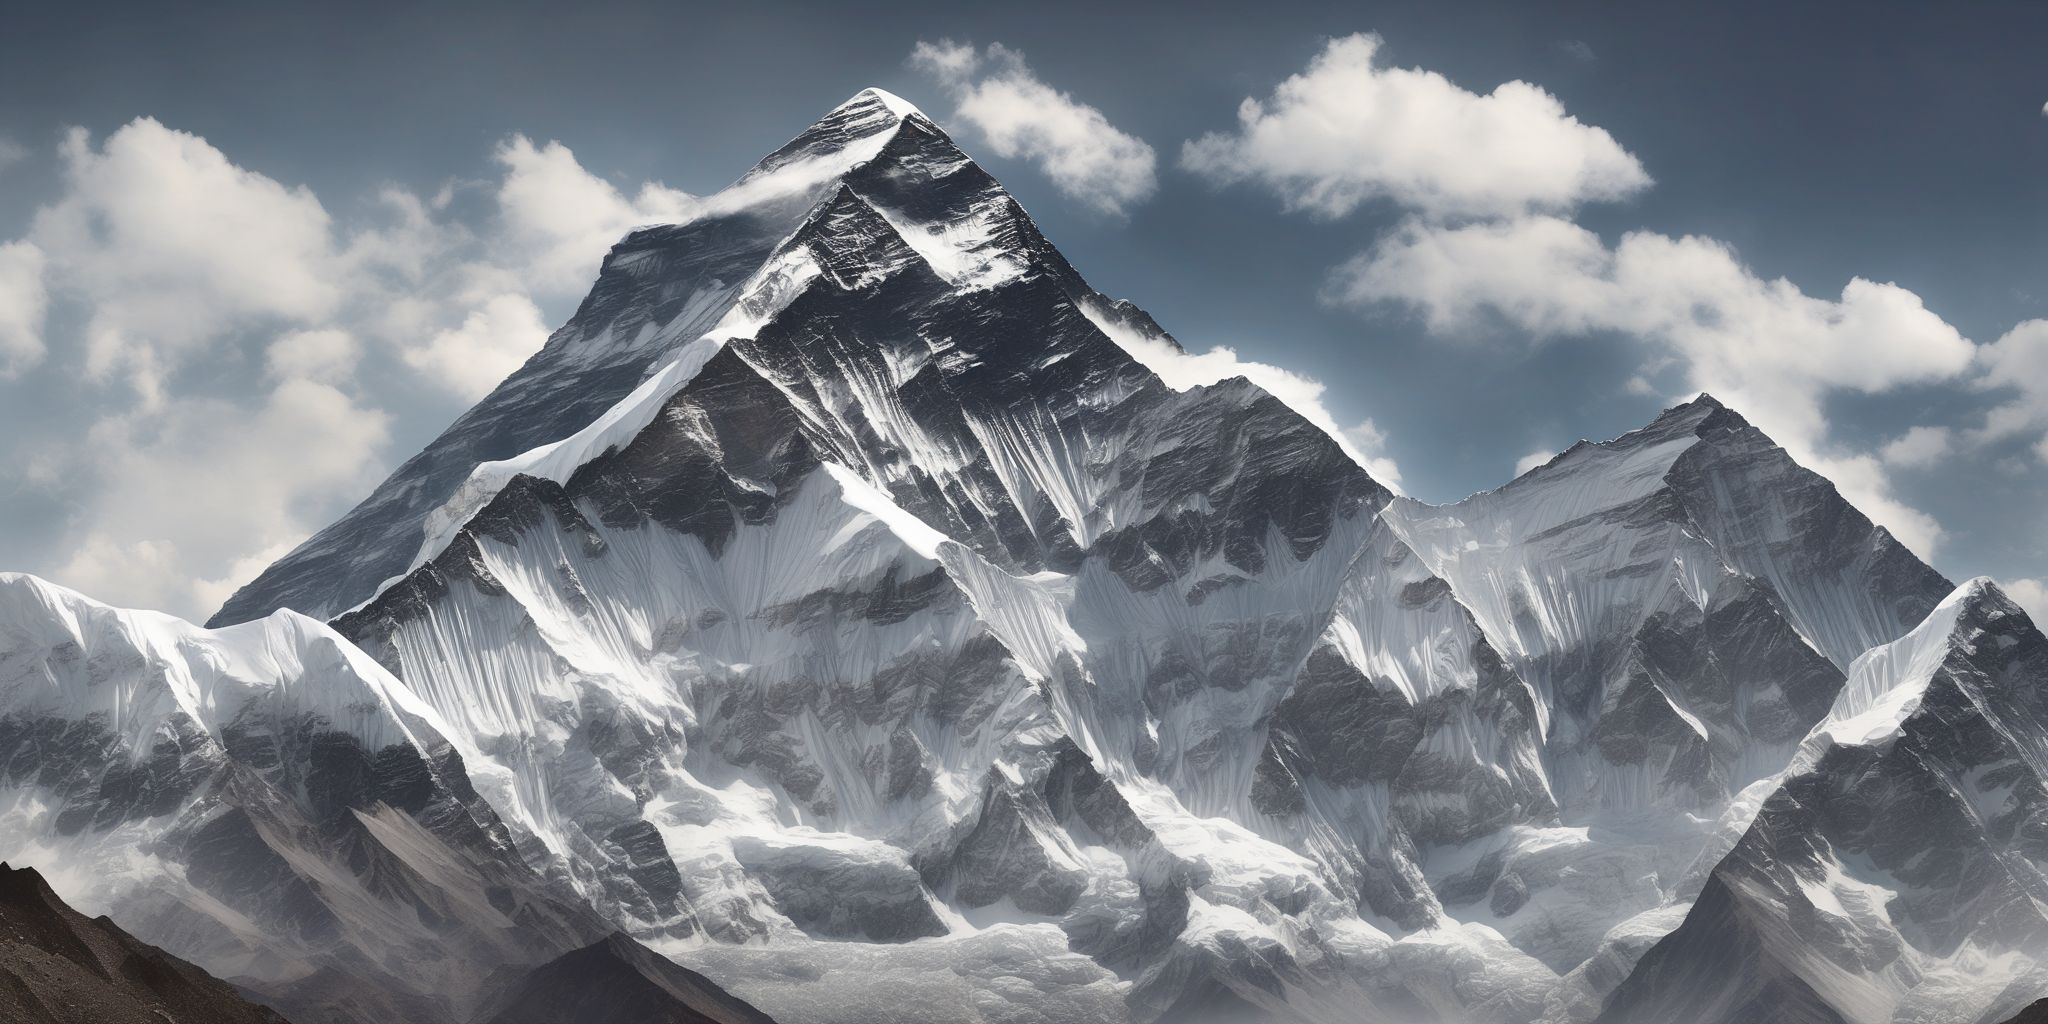 Mount Everest  in realistic, photographic style